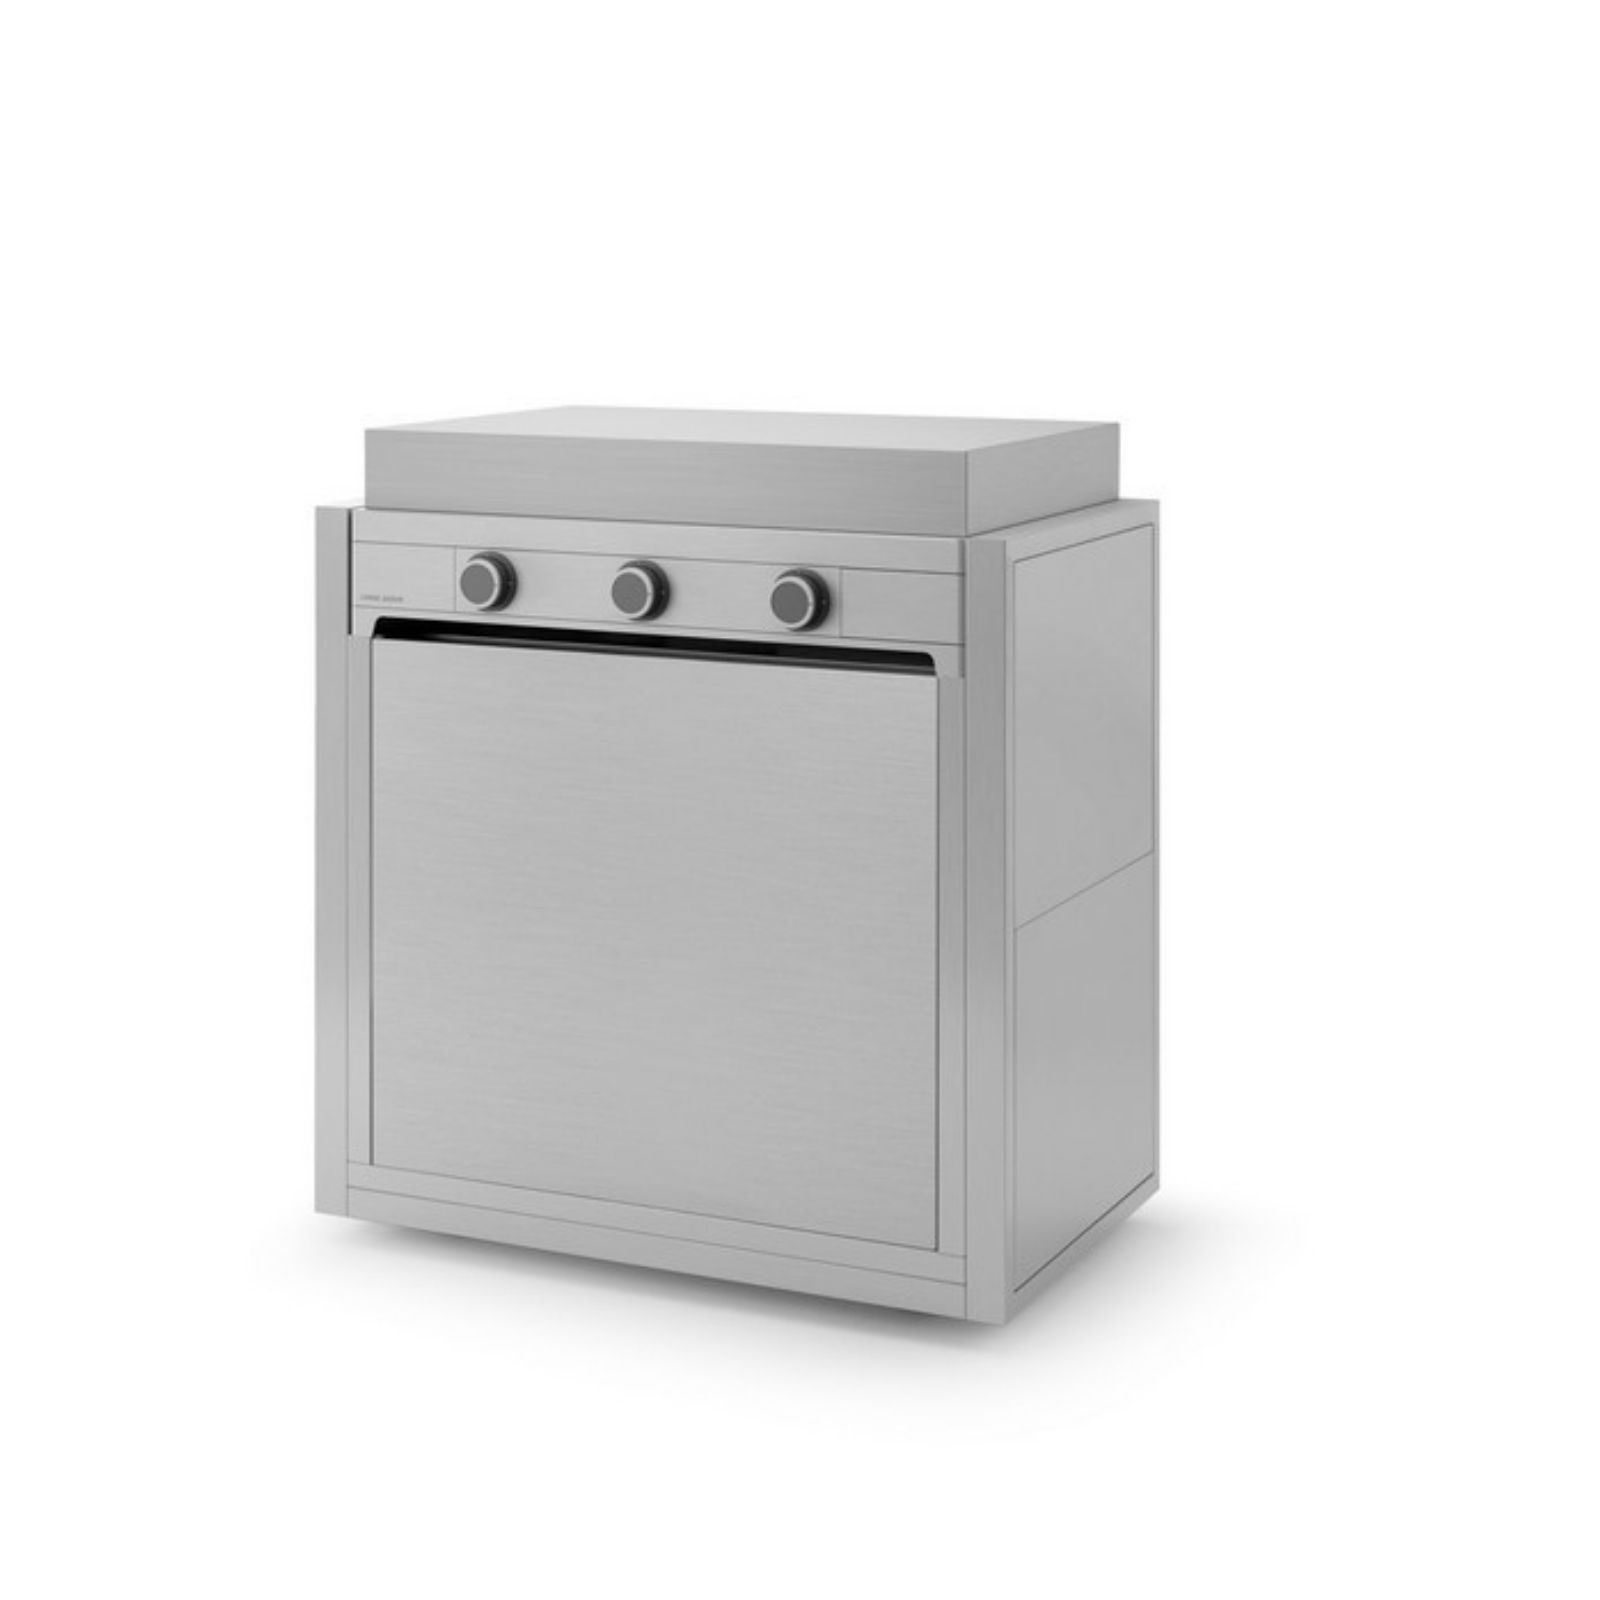 chariot-modern-75-inox-forge-adour-2